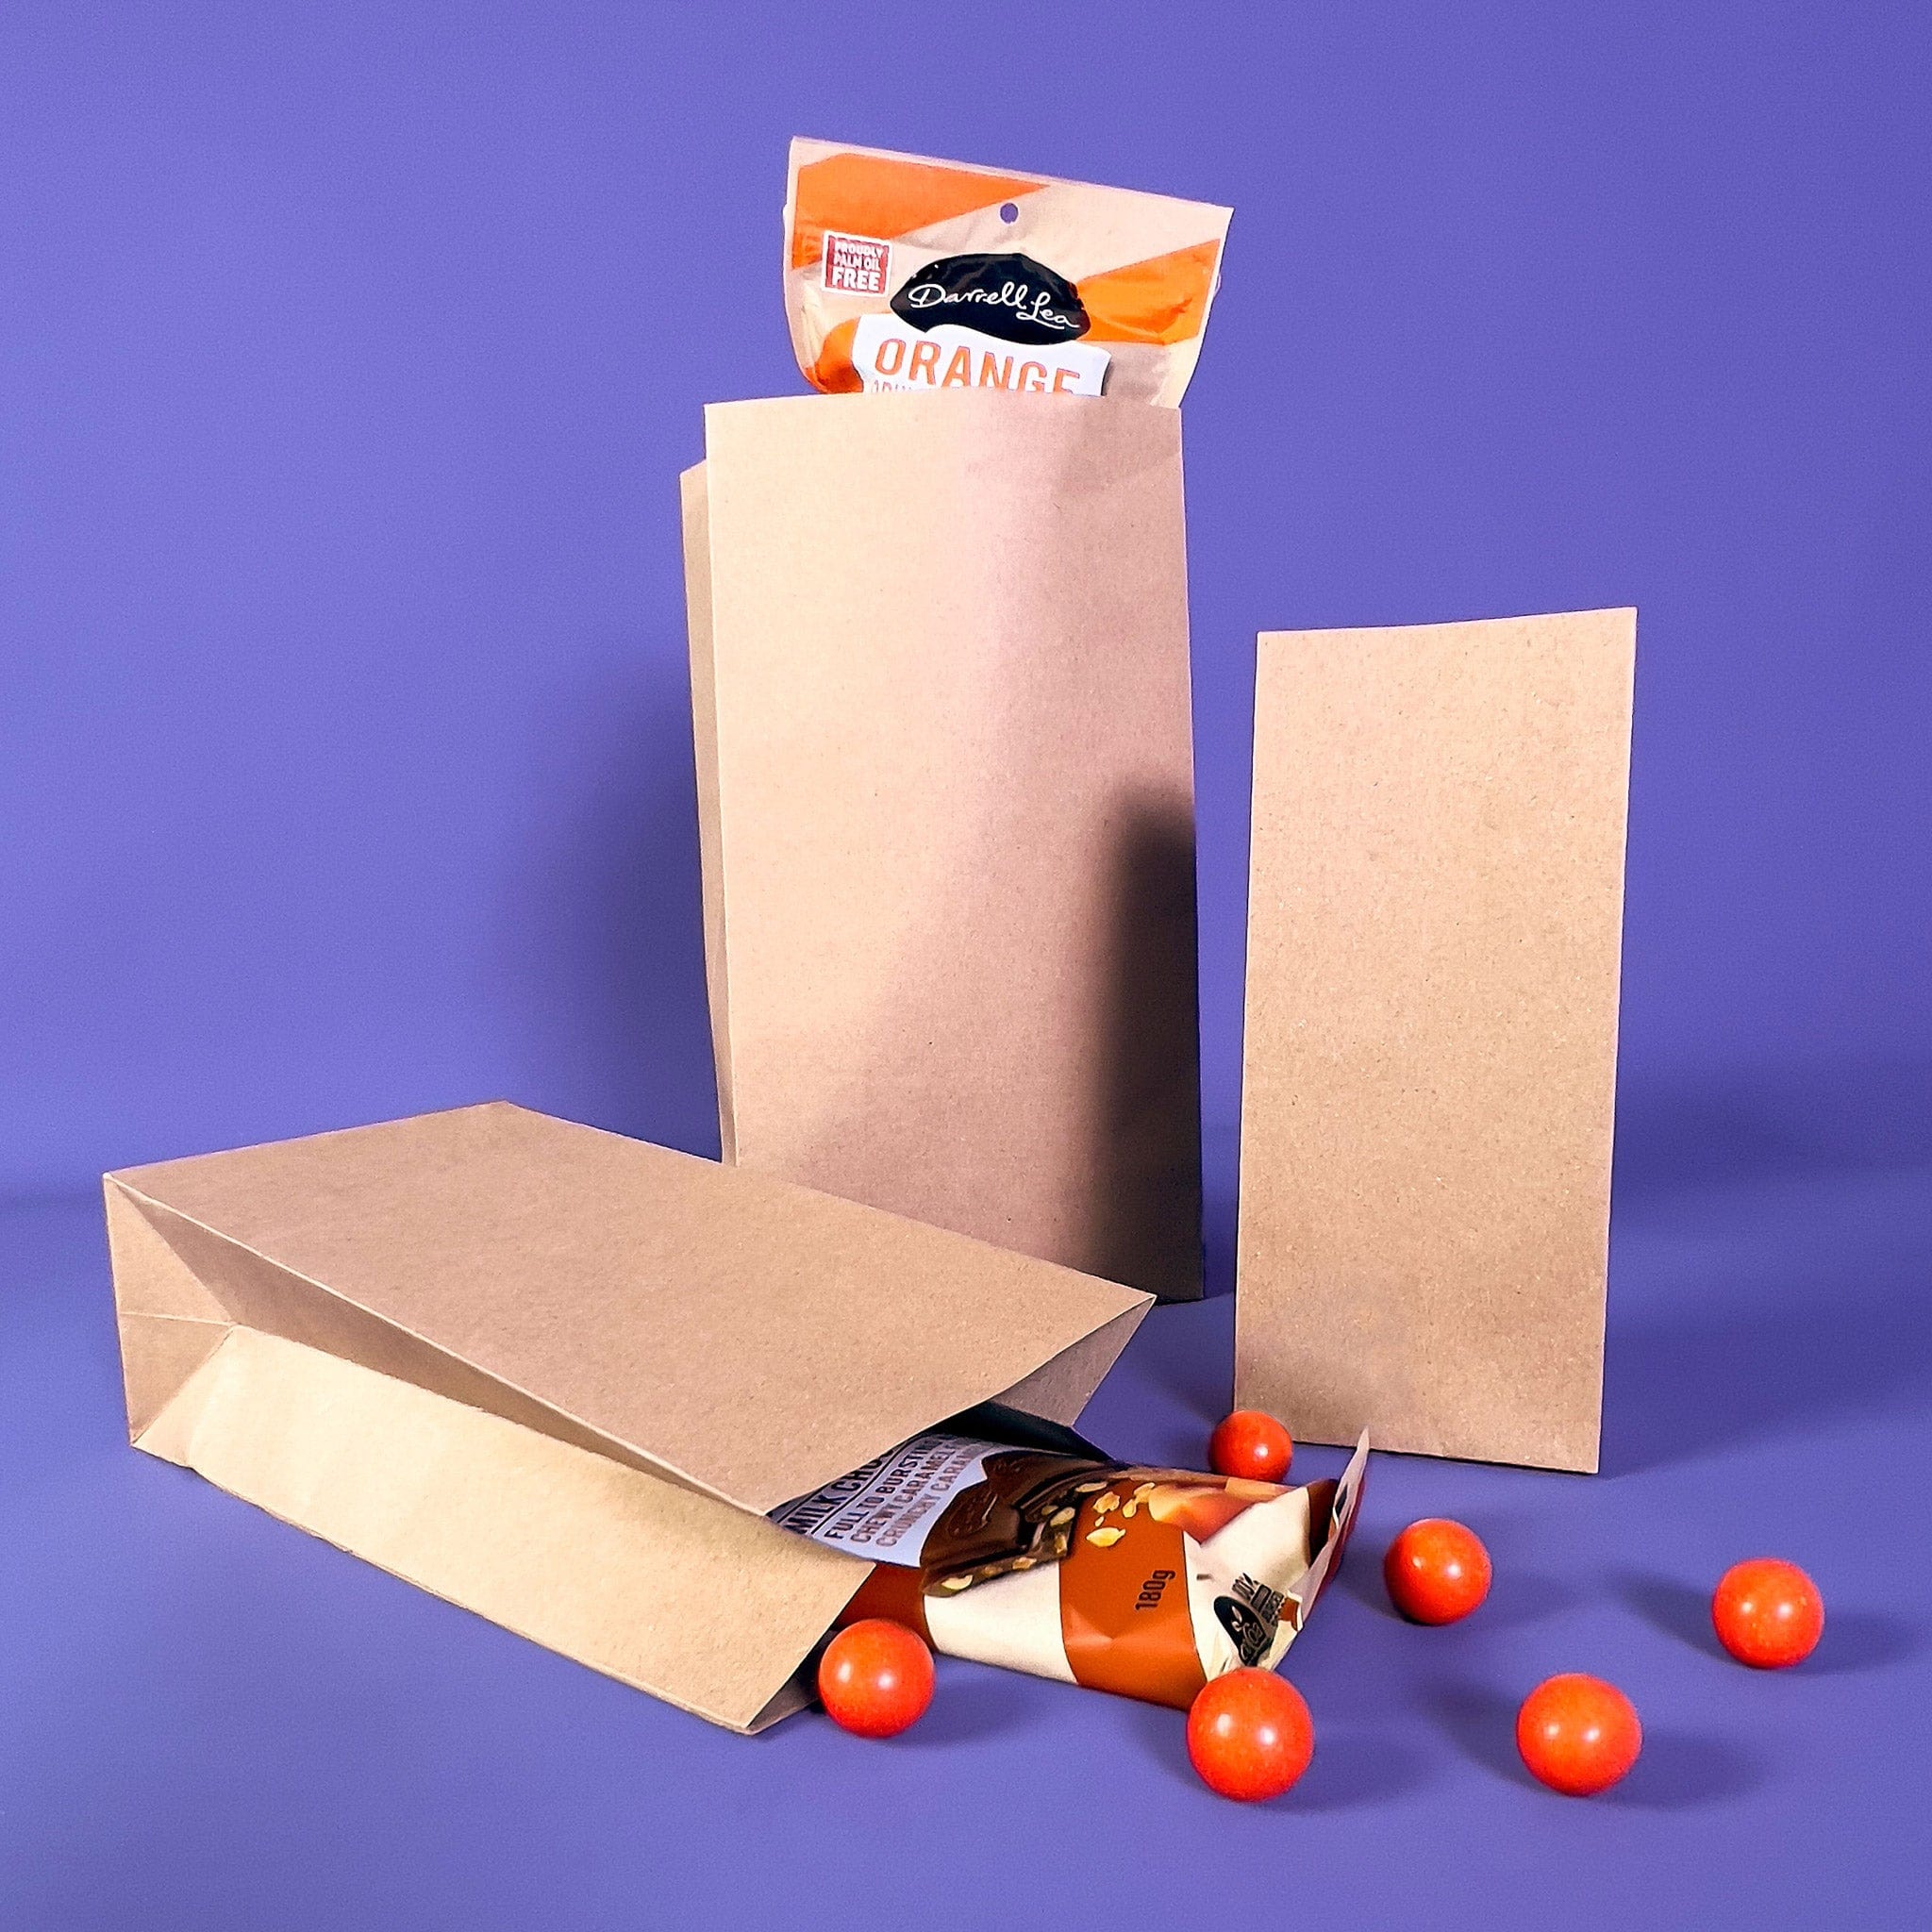 Flat Bottom Paper Bag - Medium with groceries